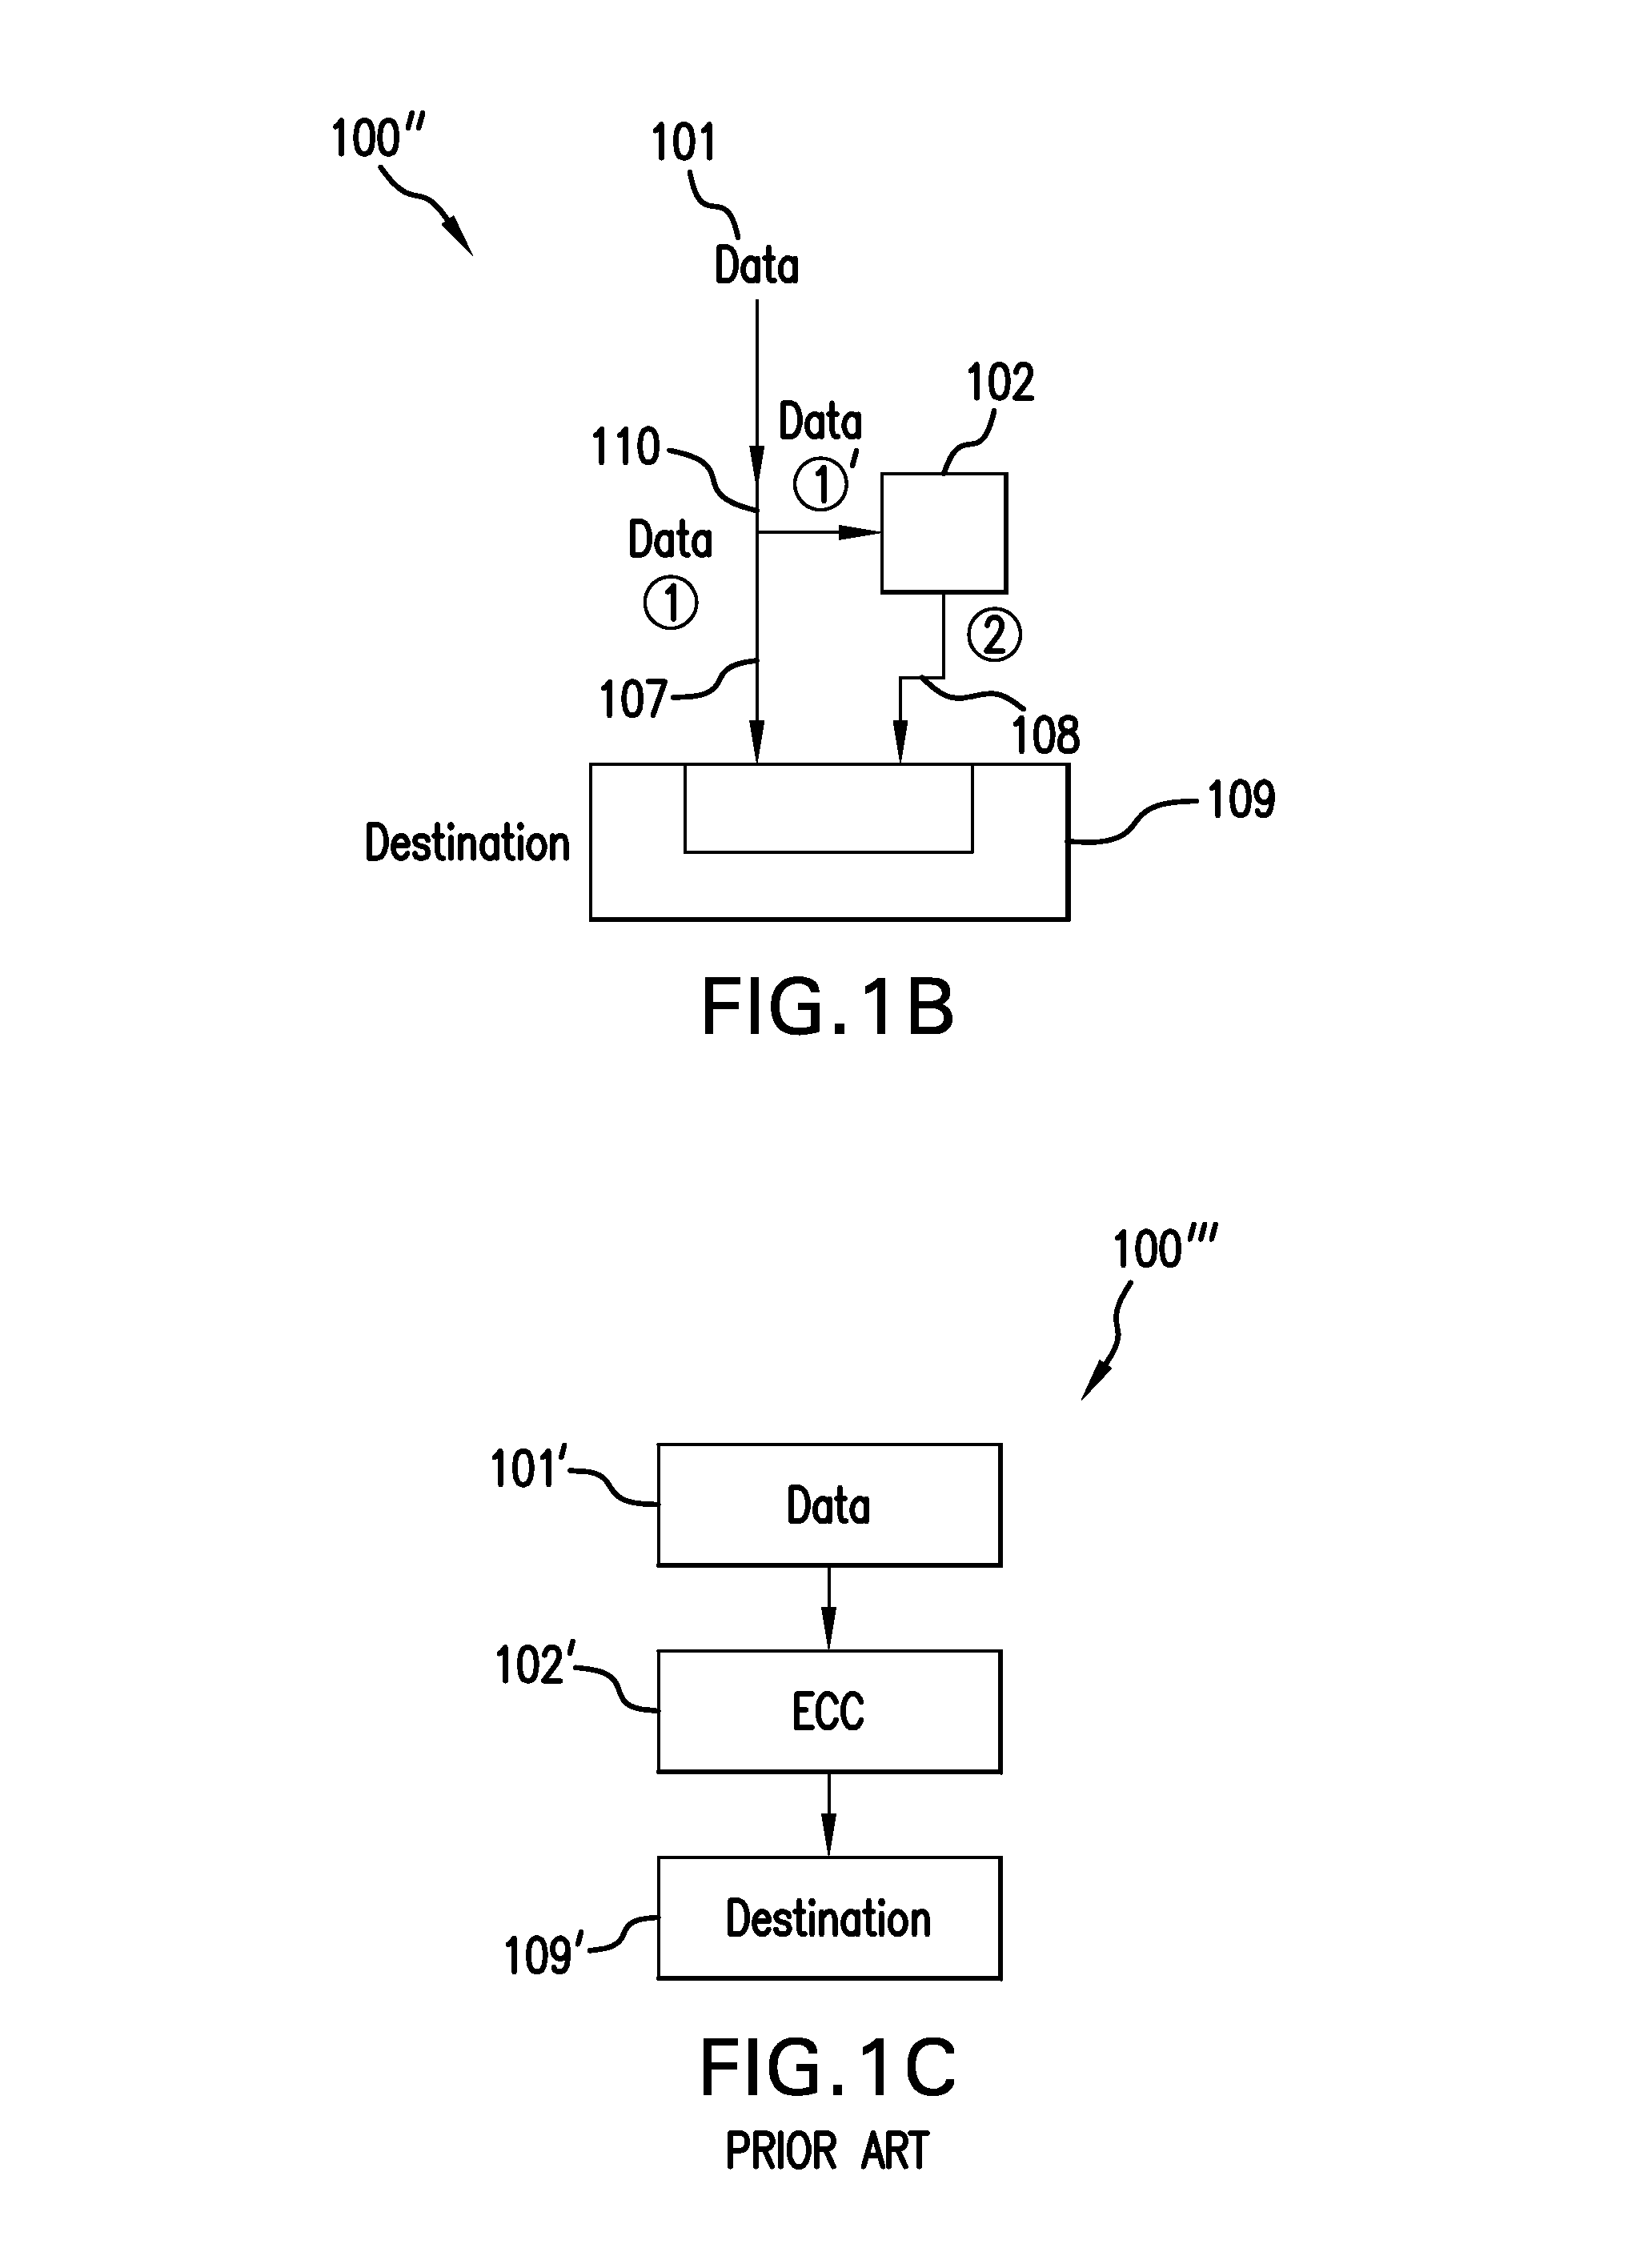 System and method for expeditious transfer of data from source to destination in error corrected manner